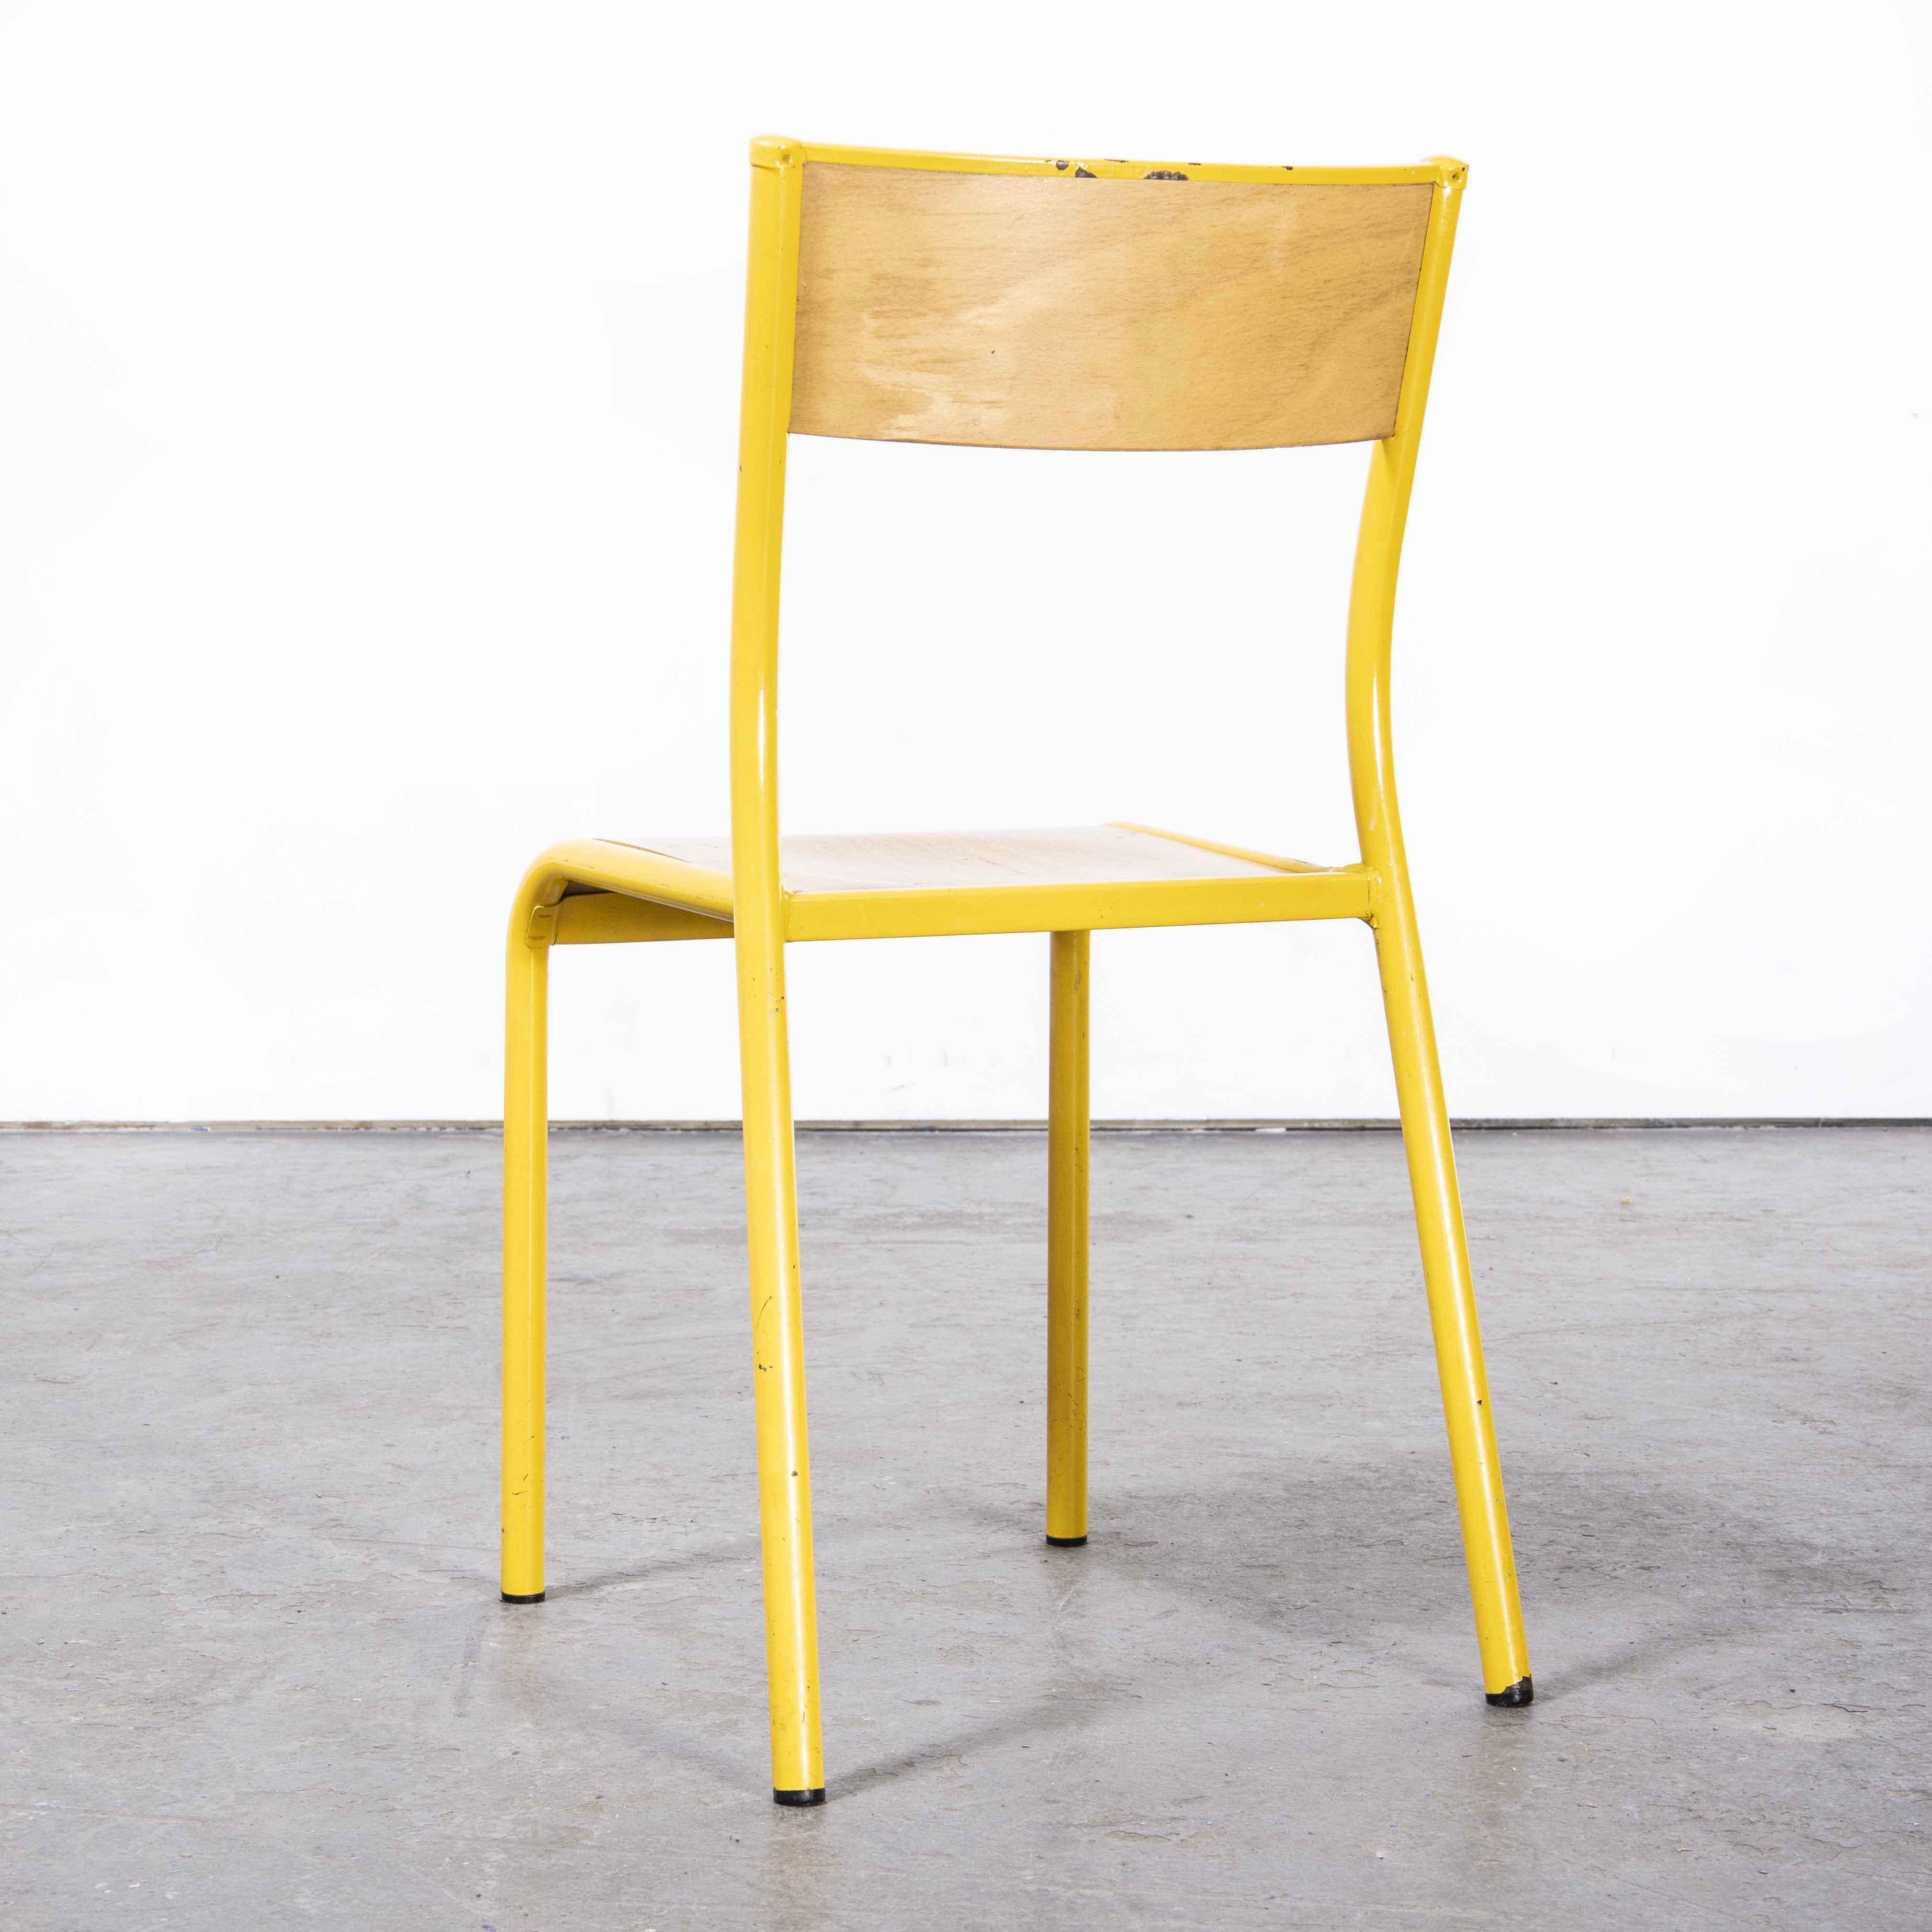 1970’s French Mullca Stacking – dining chairs – yellow 510 – various quantities available

1970’s French Mullca Stacking – dining chairs – yellow 510 – various quantities available. One of our most favorite chairs, in 1947 Robert Muller and Gaston